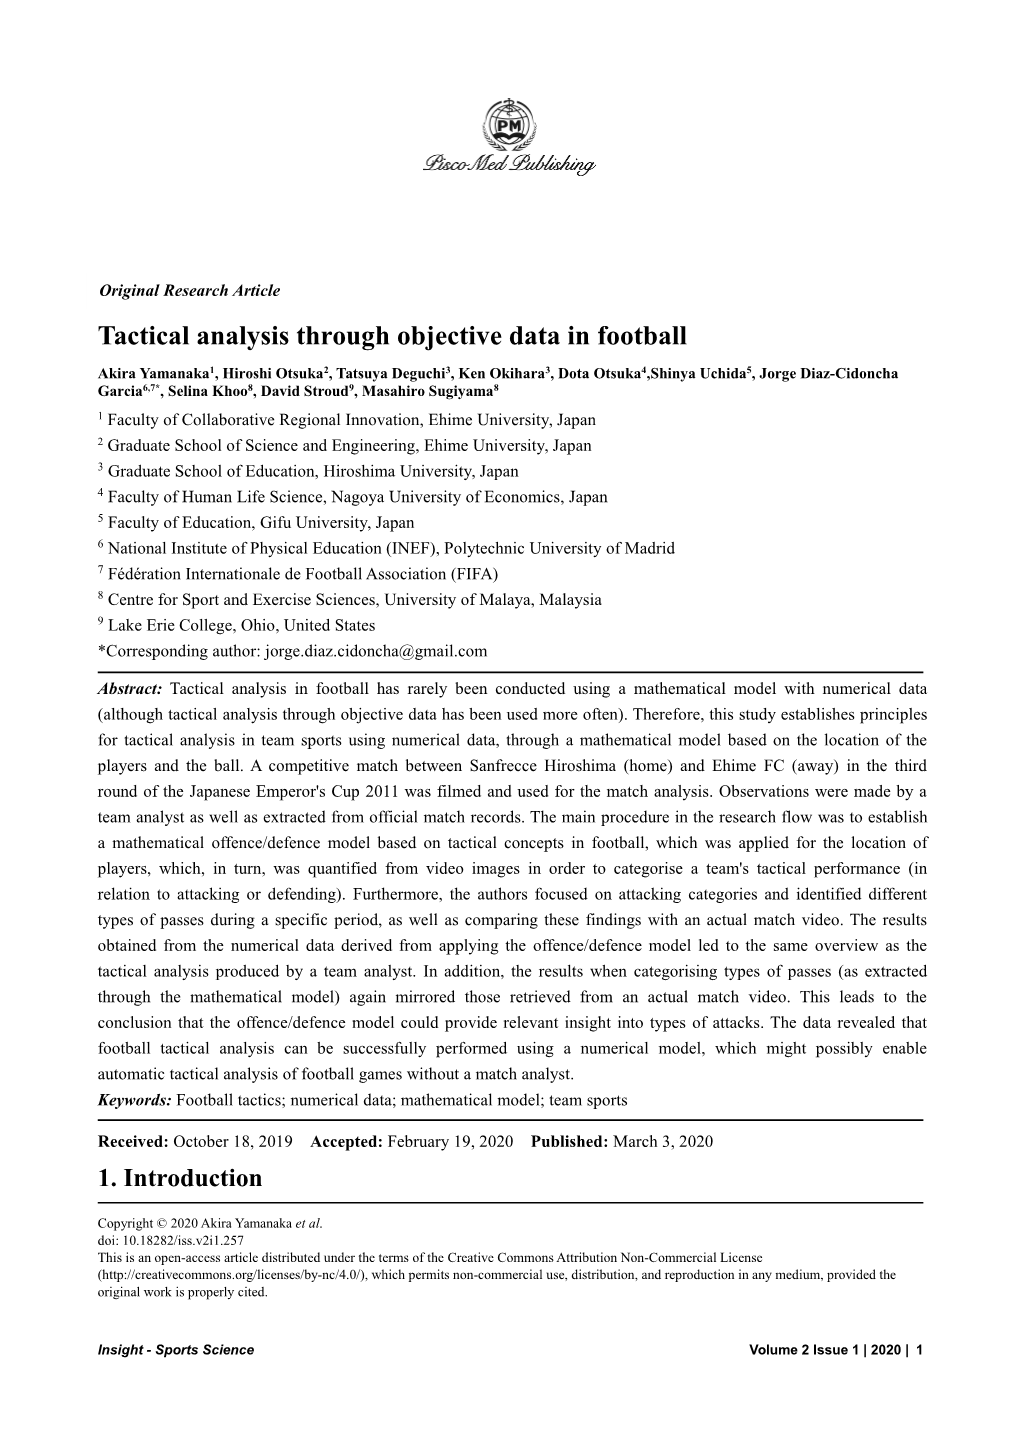 Tactical Analysis Through Objective Data in Football